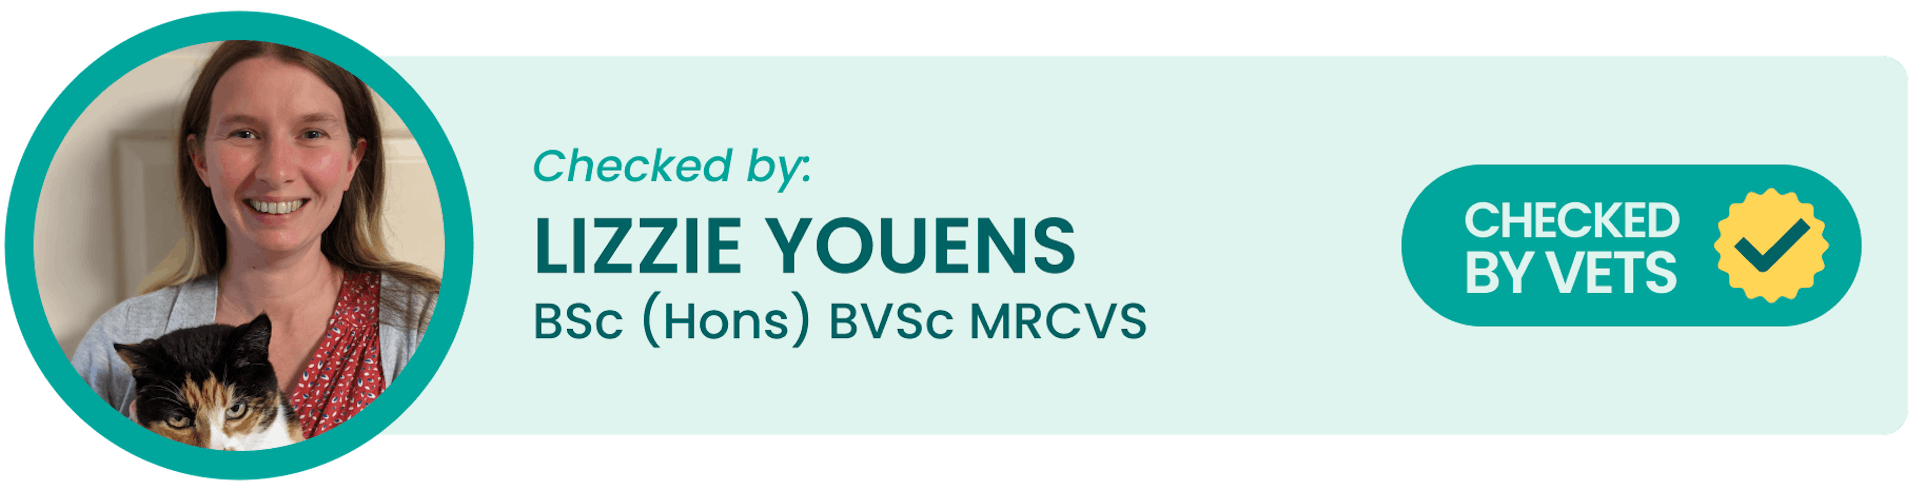 Checked by: Lizzie Youens BSc (Hons) BVSc MRCVS